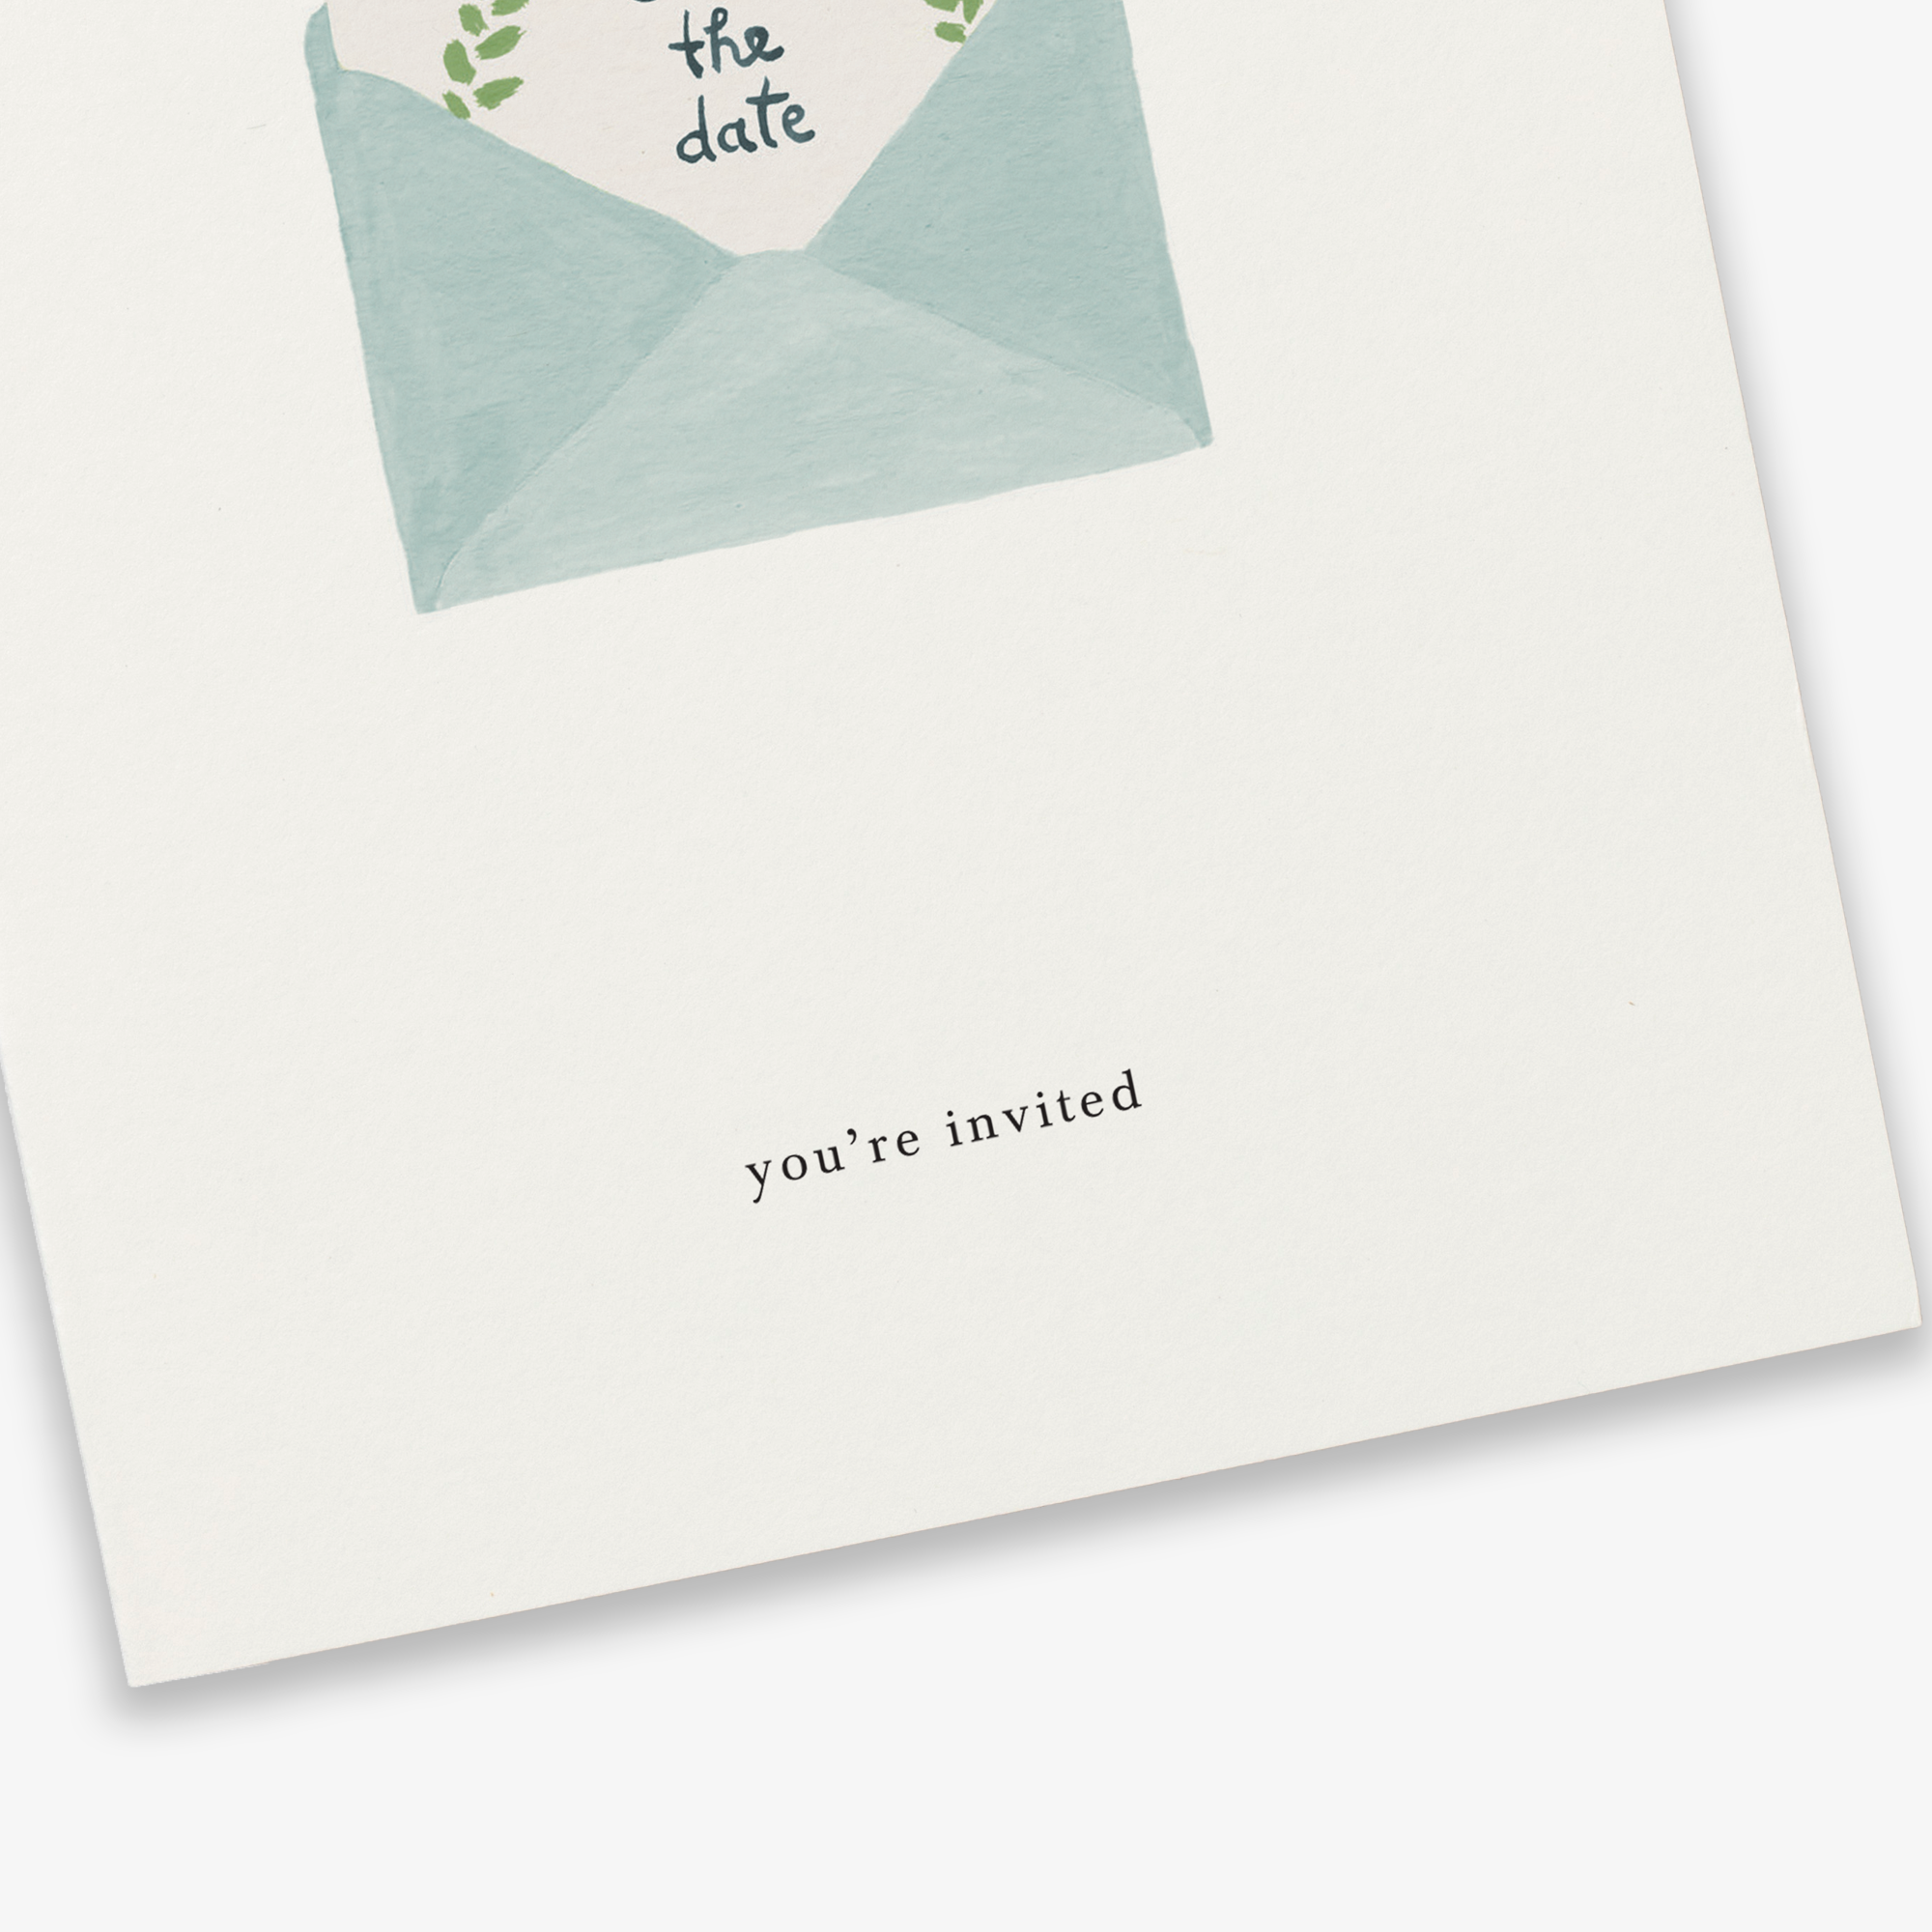 GREETING CARD // SAVE THE DATE